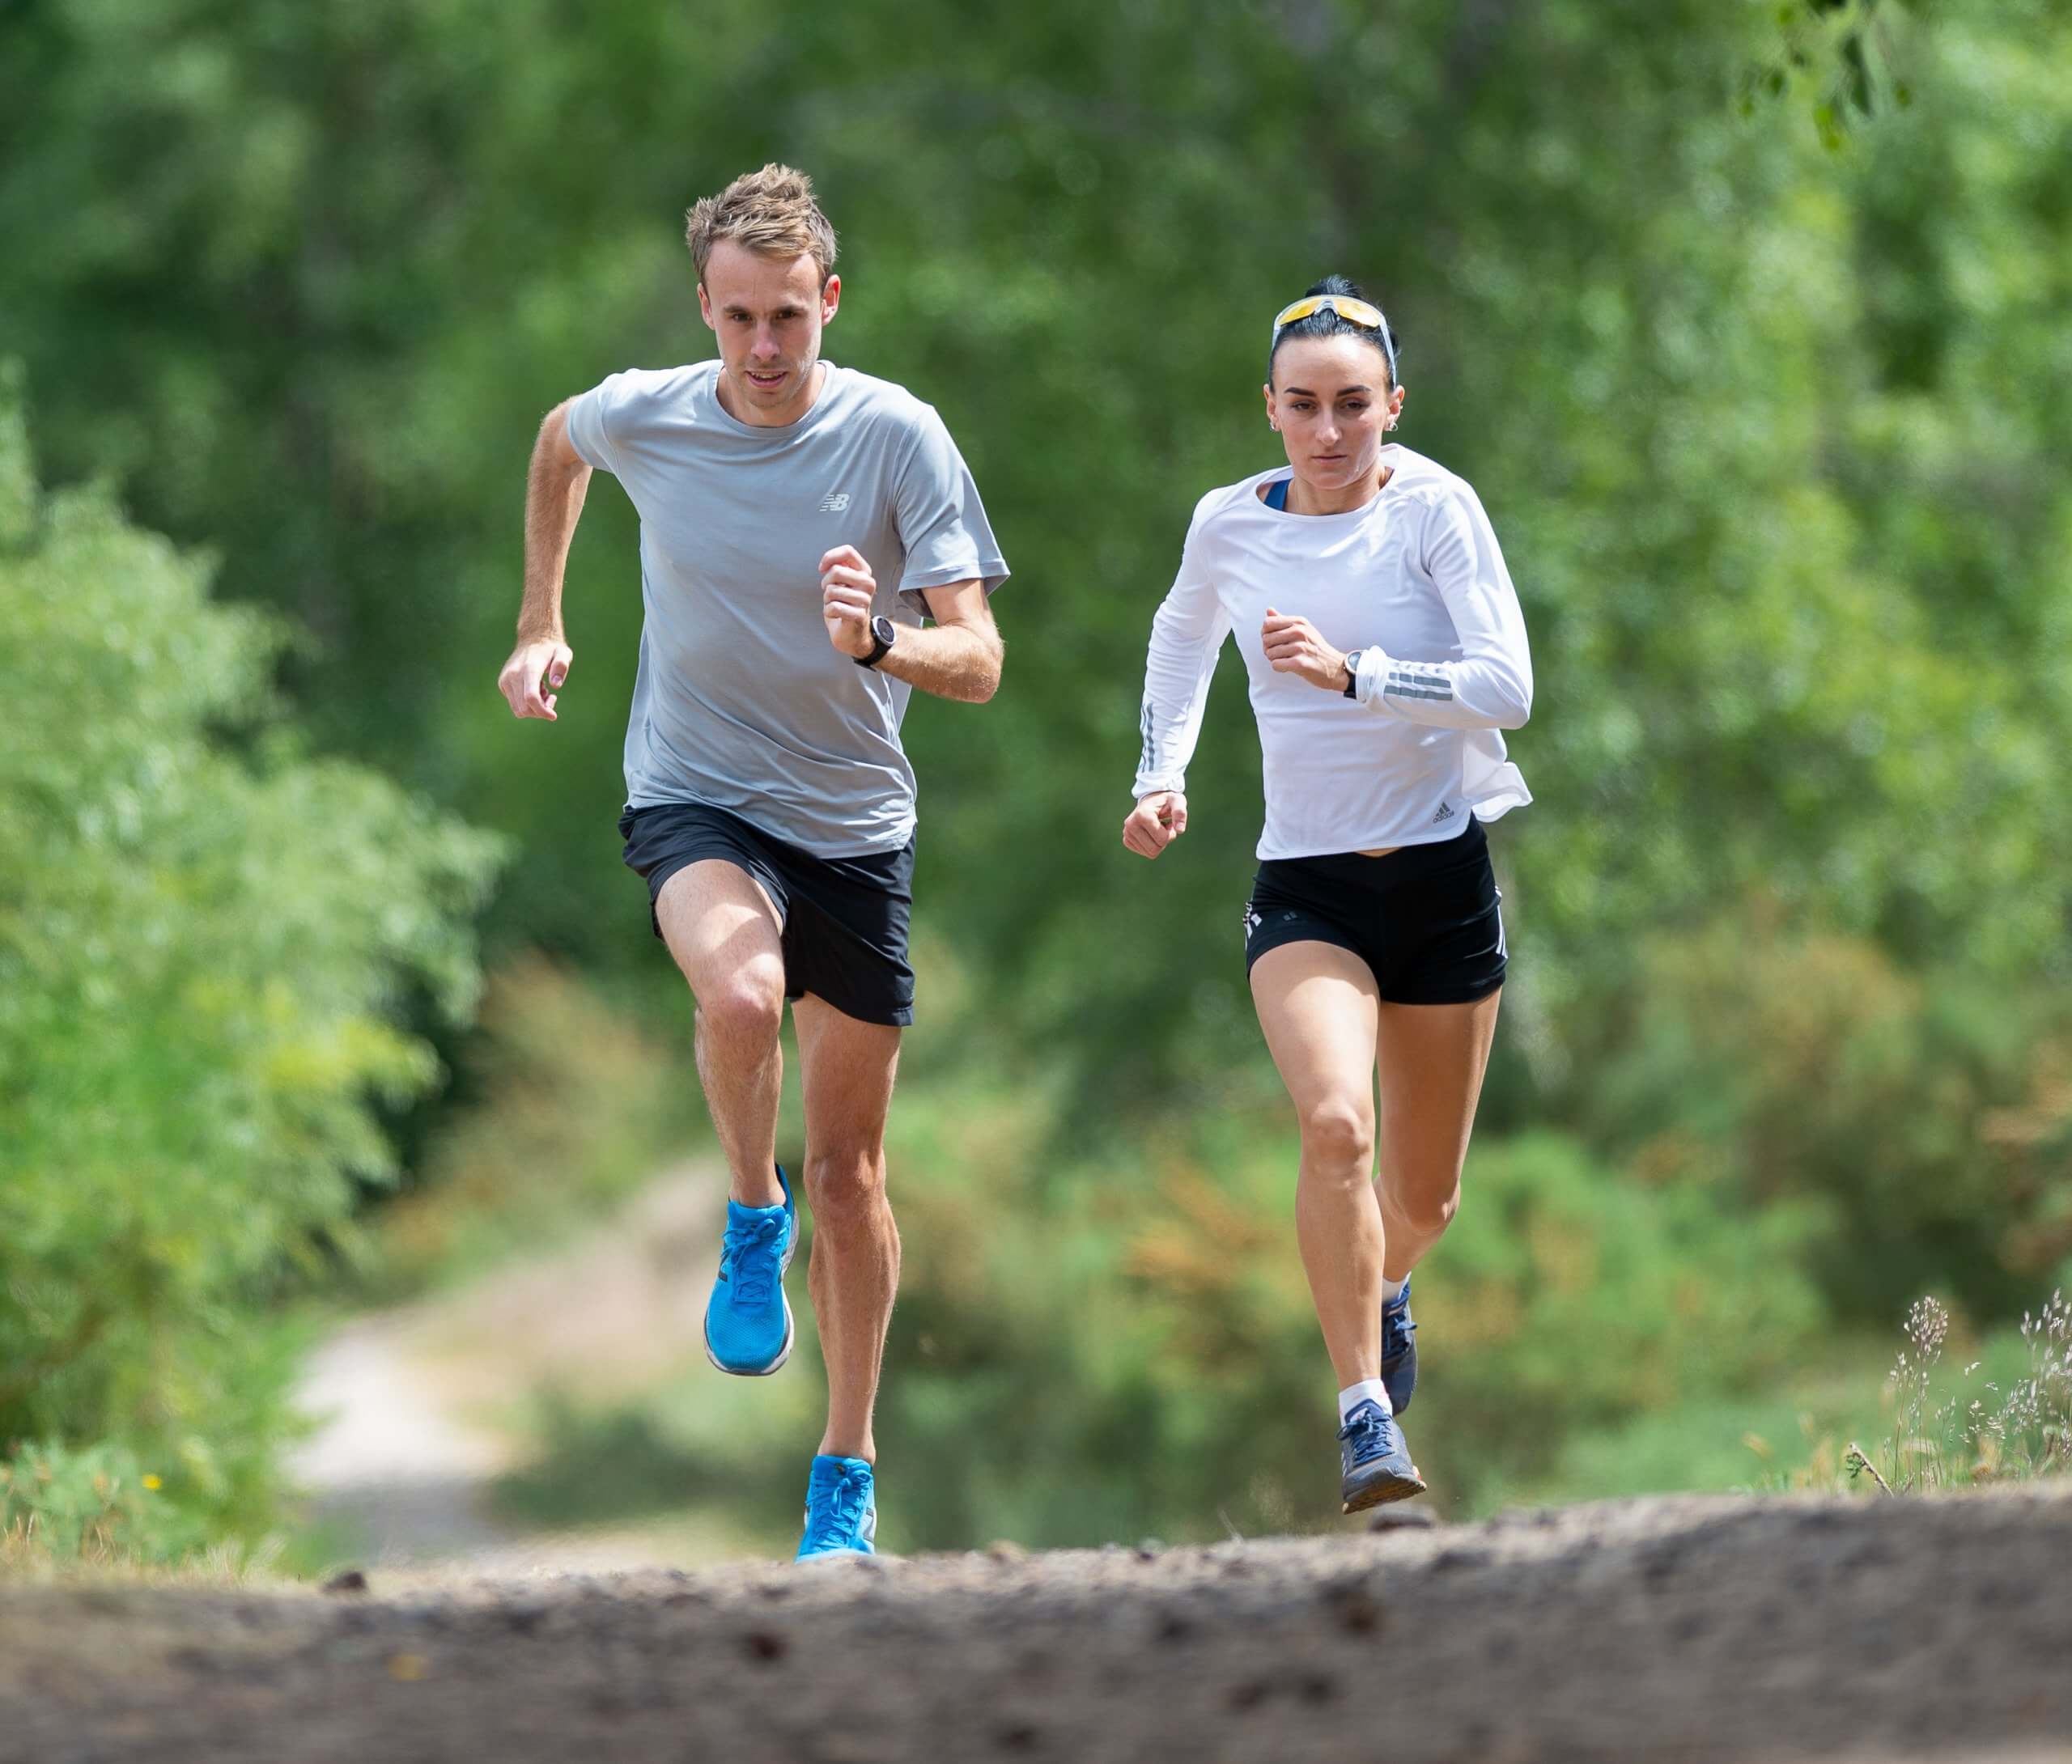 Lily and Ben running together